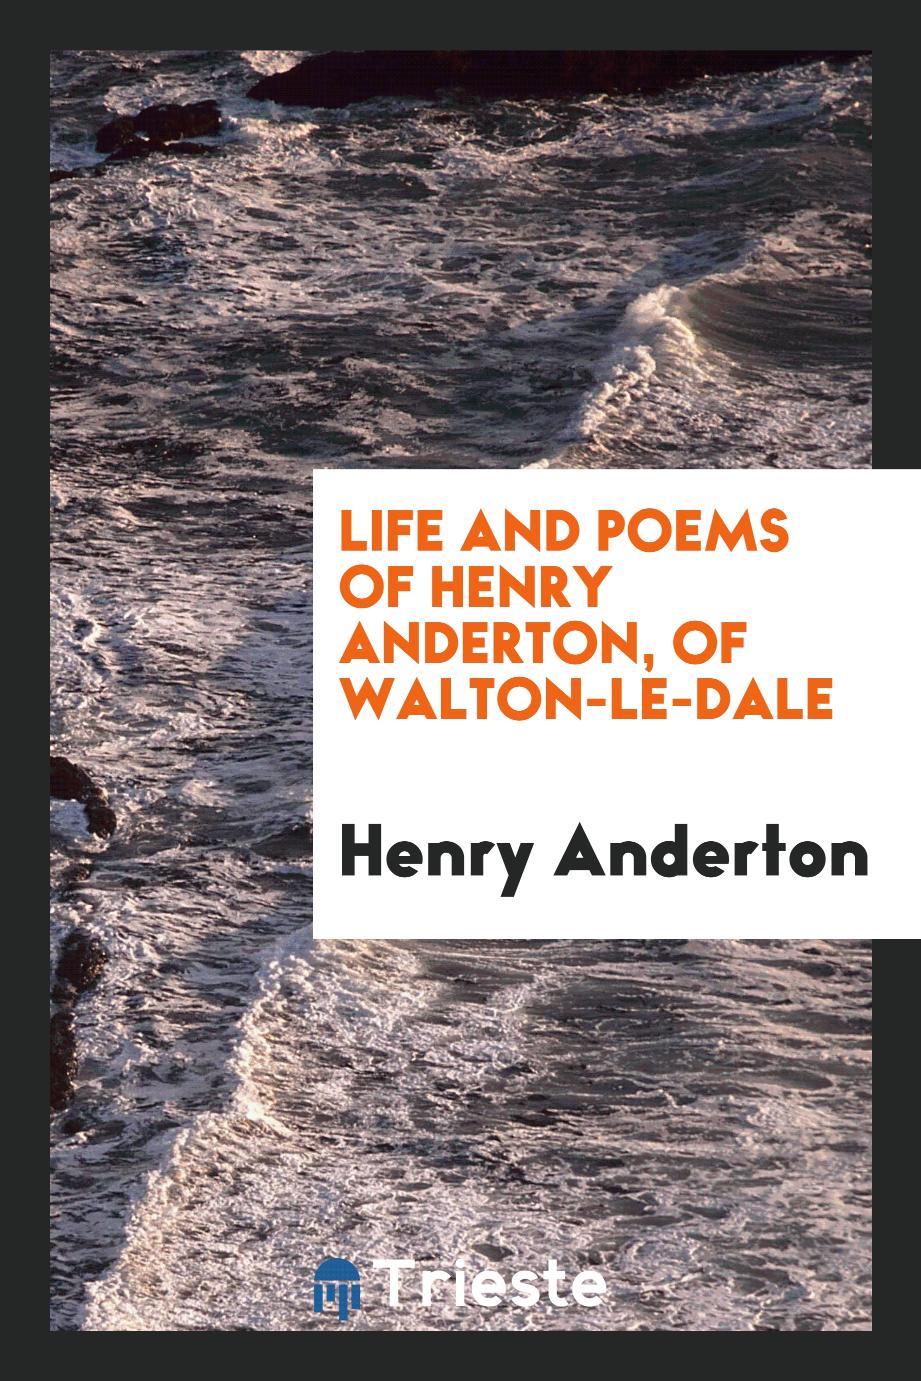 Life and poems of Henry Anderton, of Walton-le-Dale